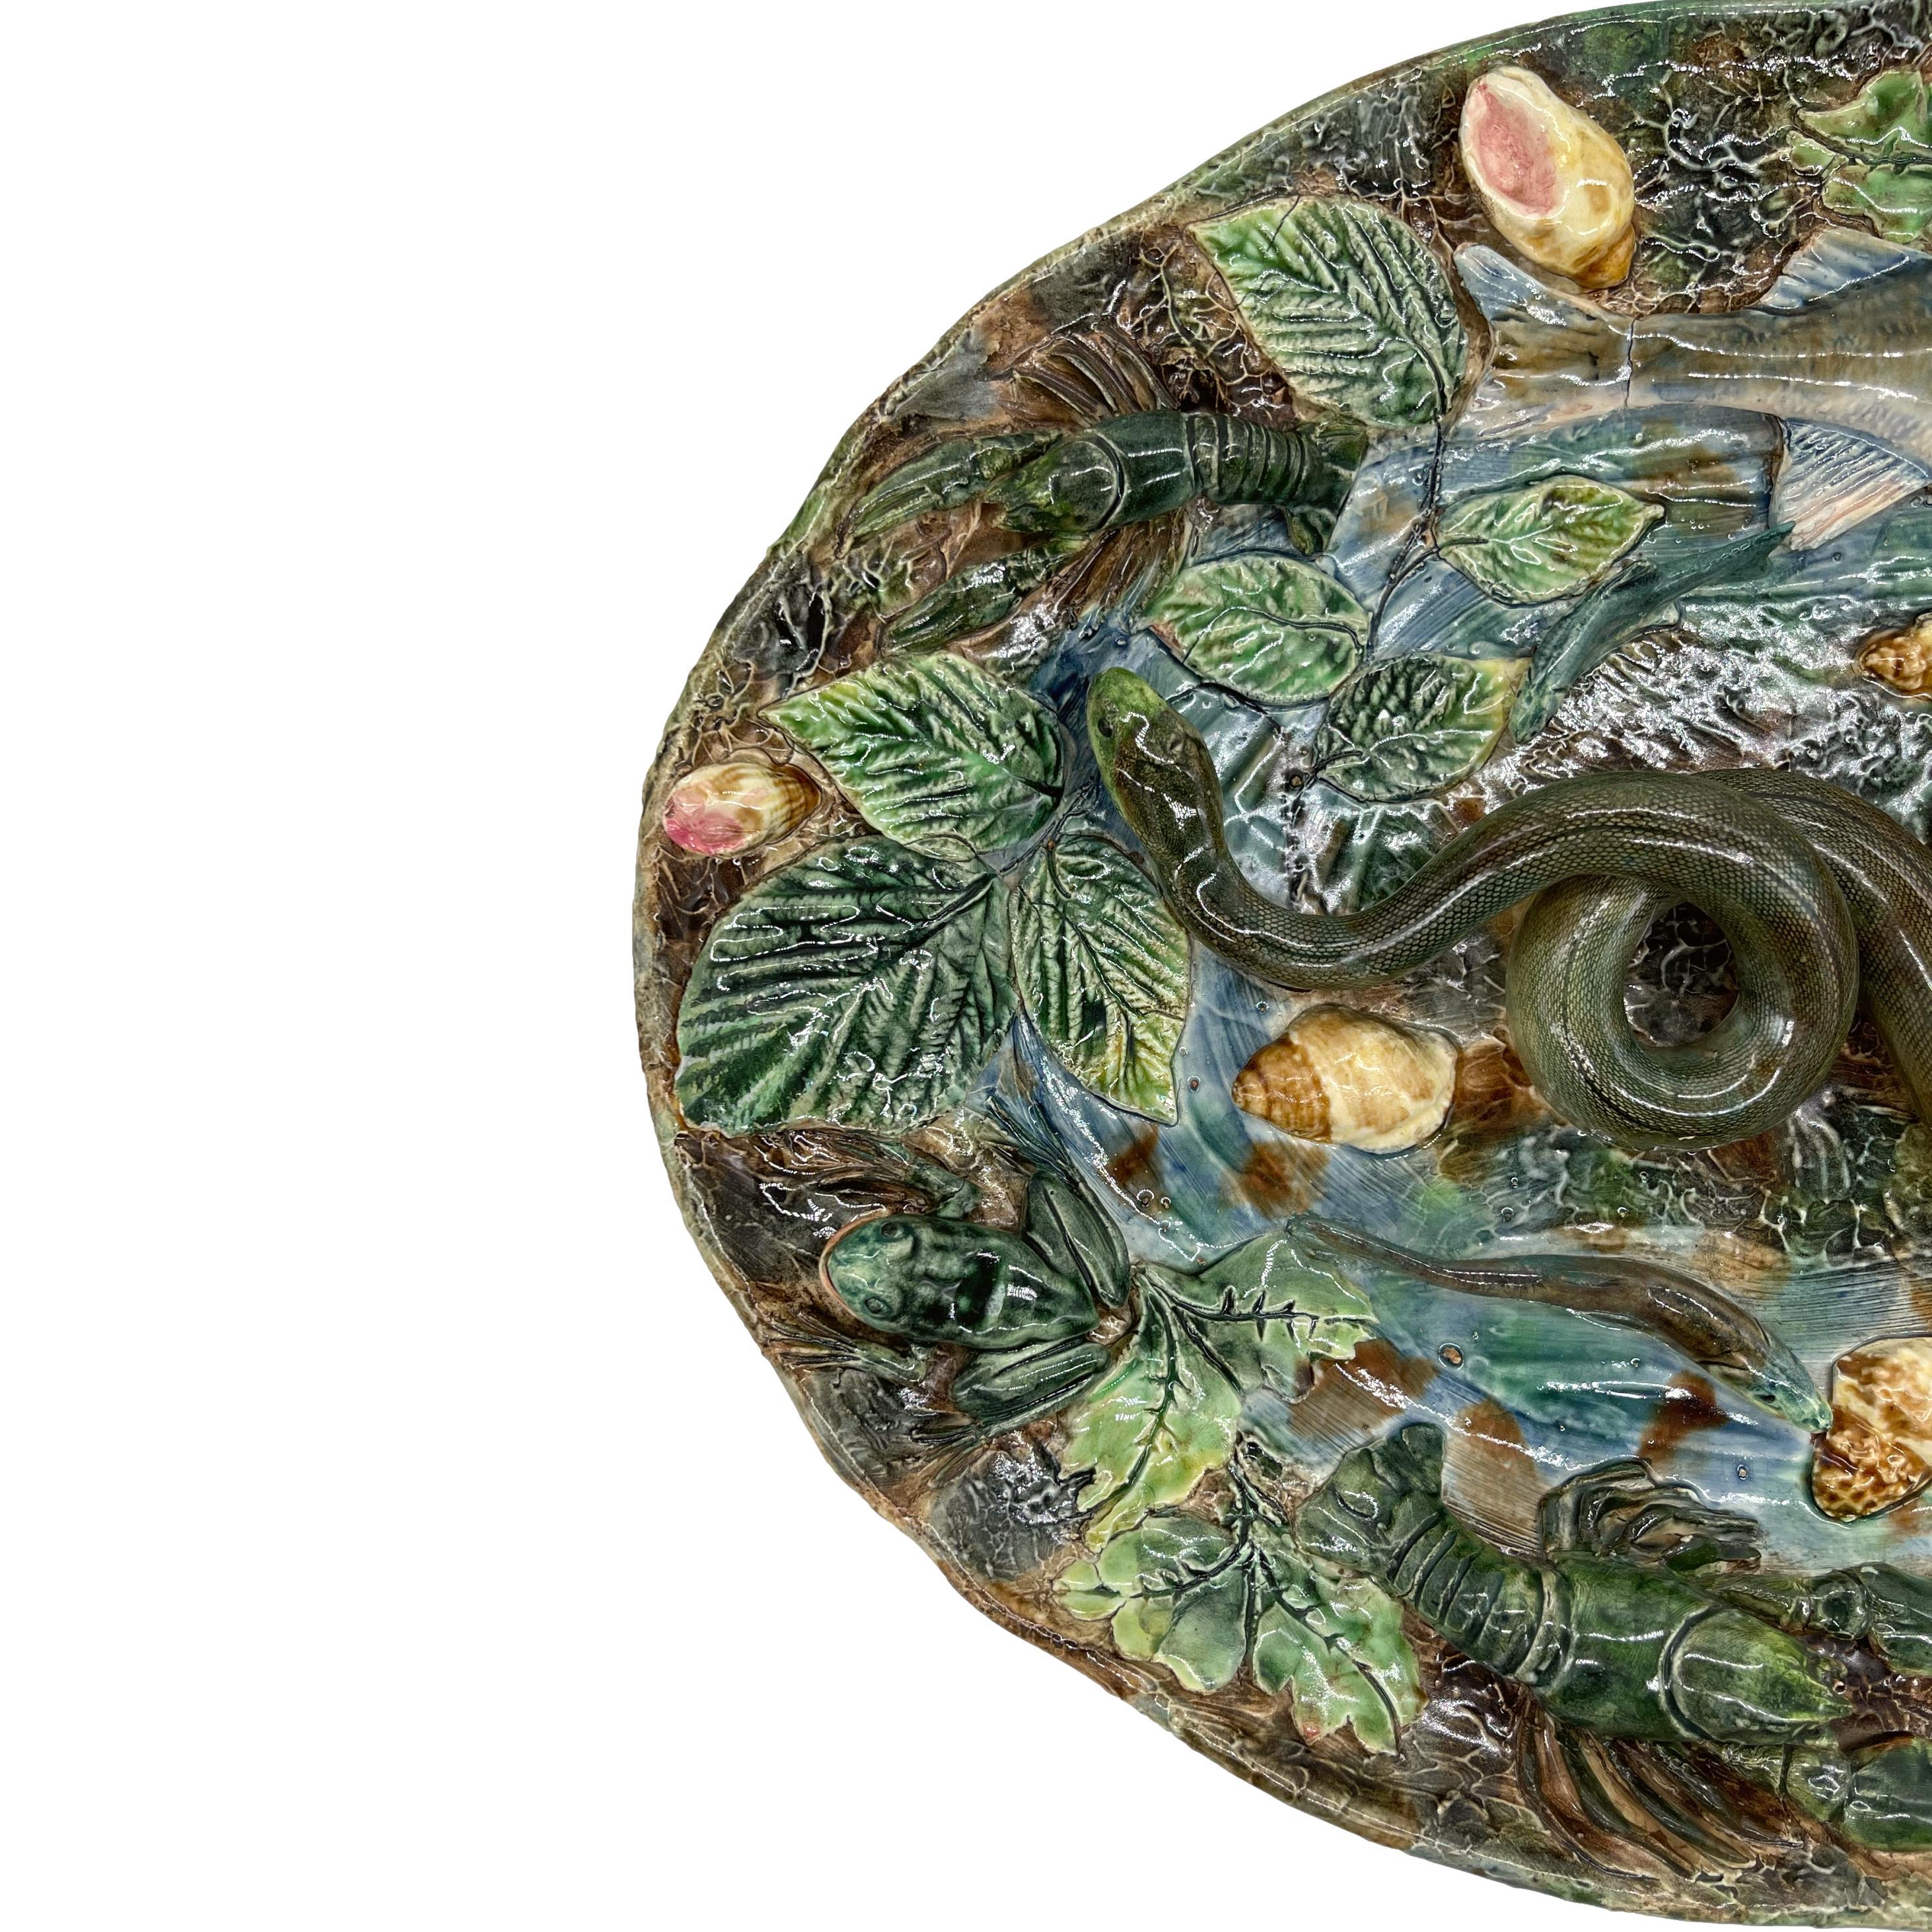 Longchamp Large Oval Palissy Ware Trompe L'oeil Platter, with molded and applied fish, two langoustines, and two naturalistically molded and glazed frogs, a green-glazed lizard, and a large snake to the center, with shells throughout, on